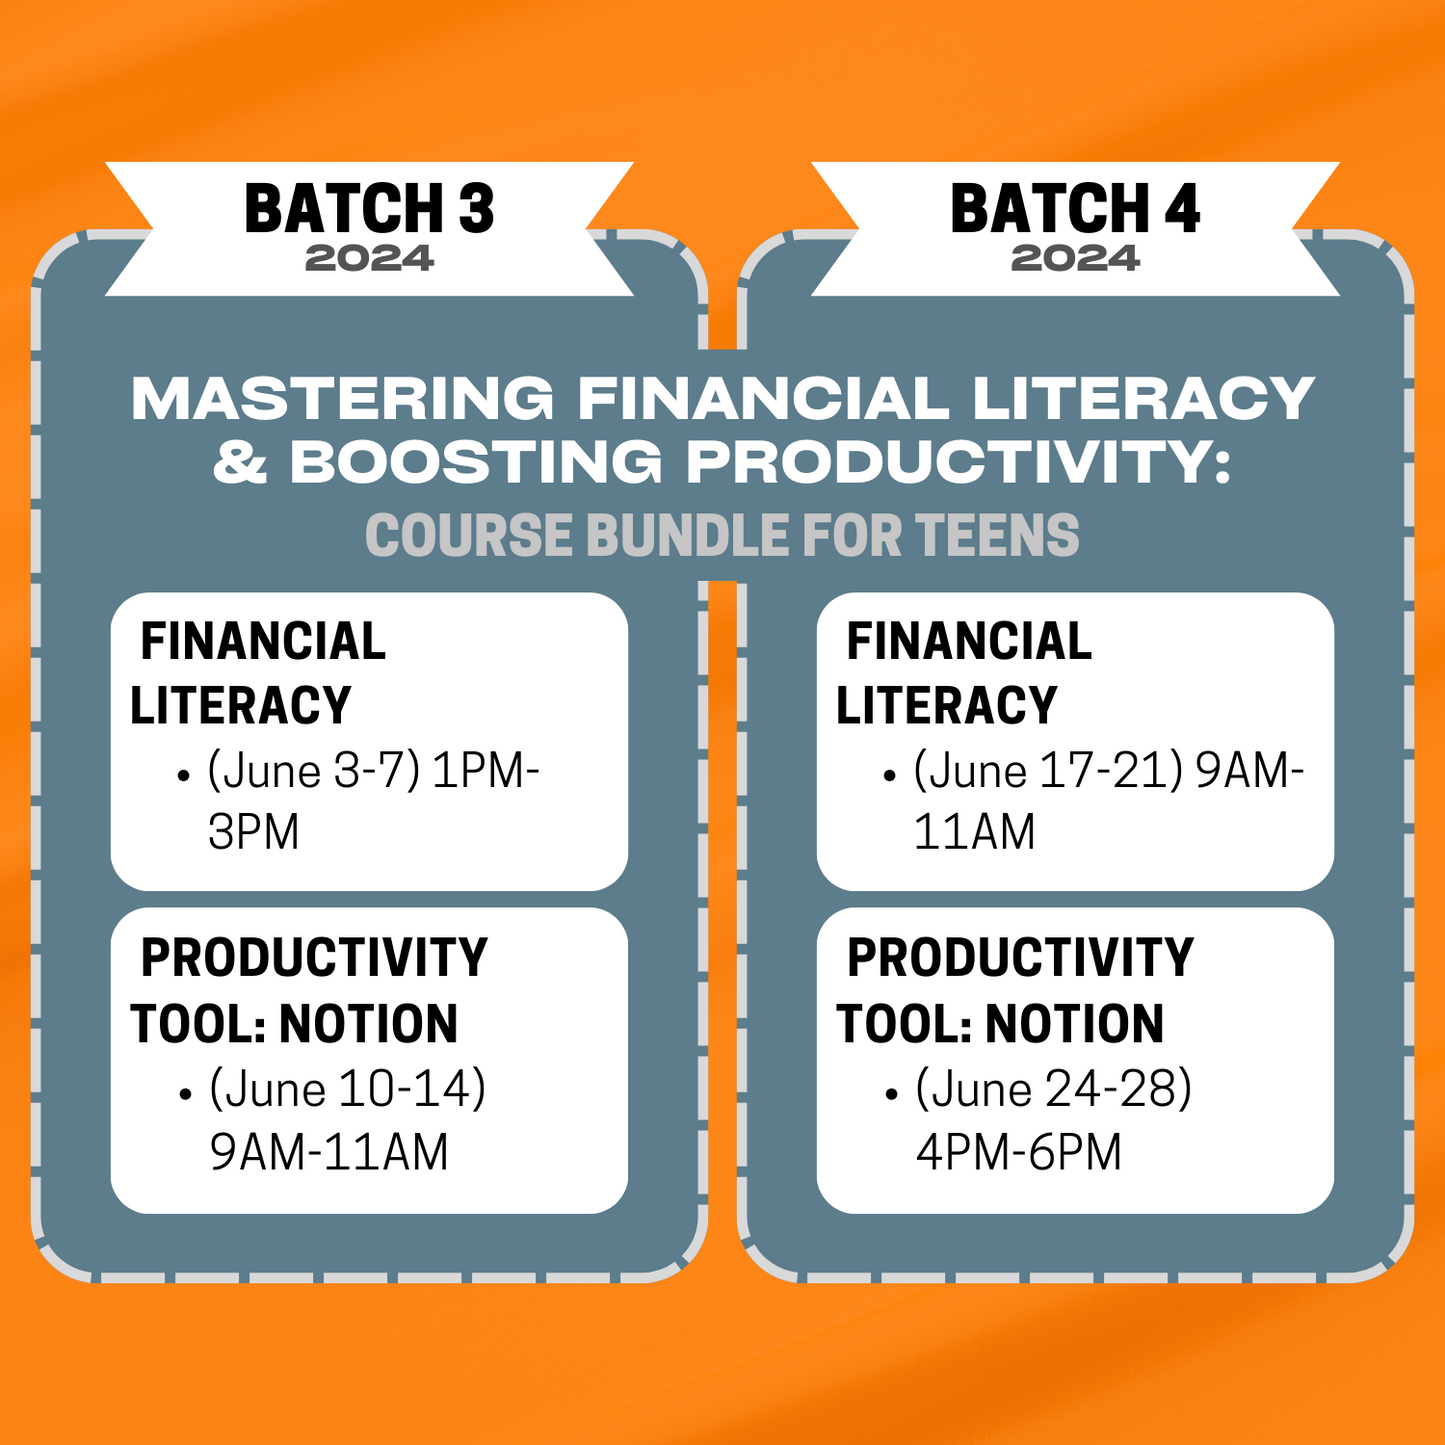 Mastering Financial Literacy & Boosting Productivity: Course Bundle for Teens